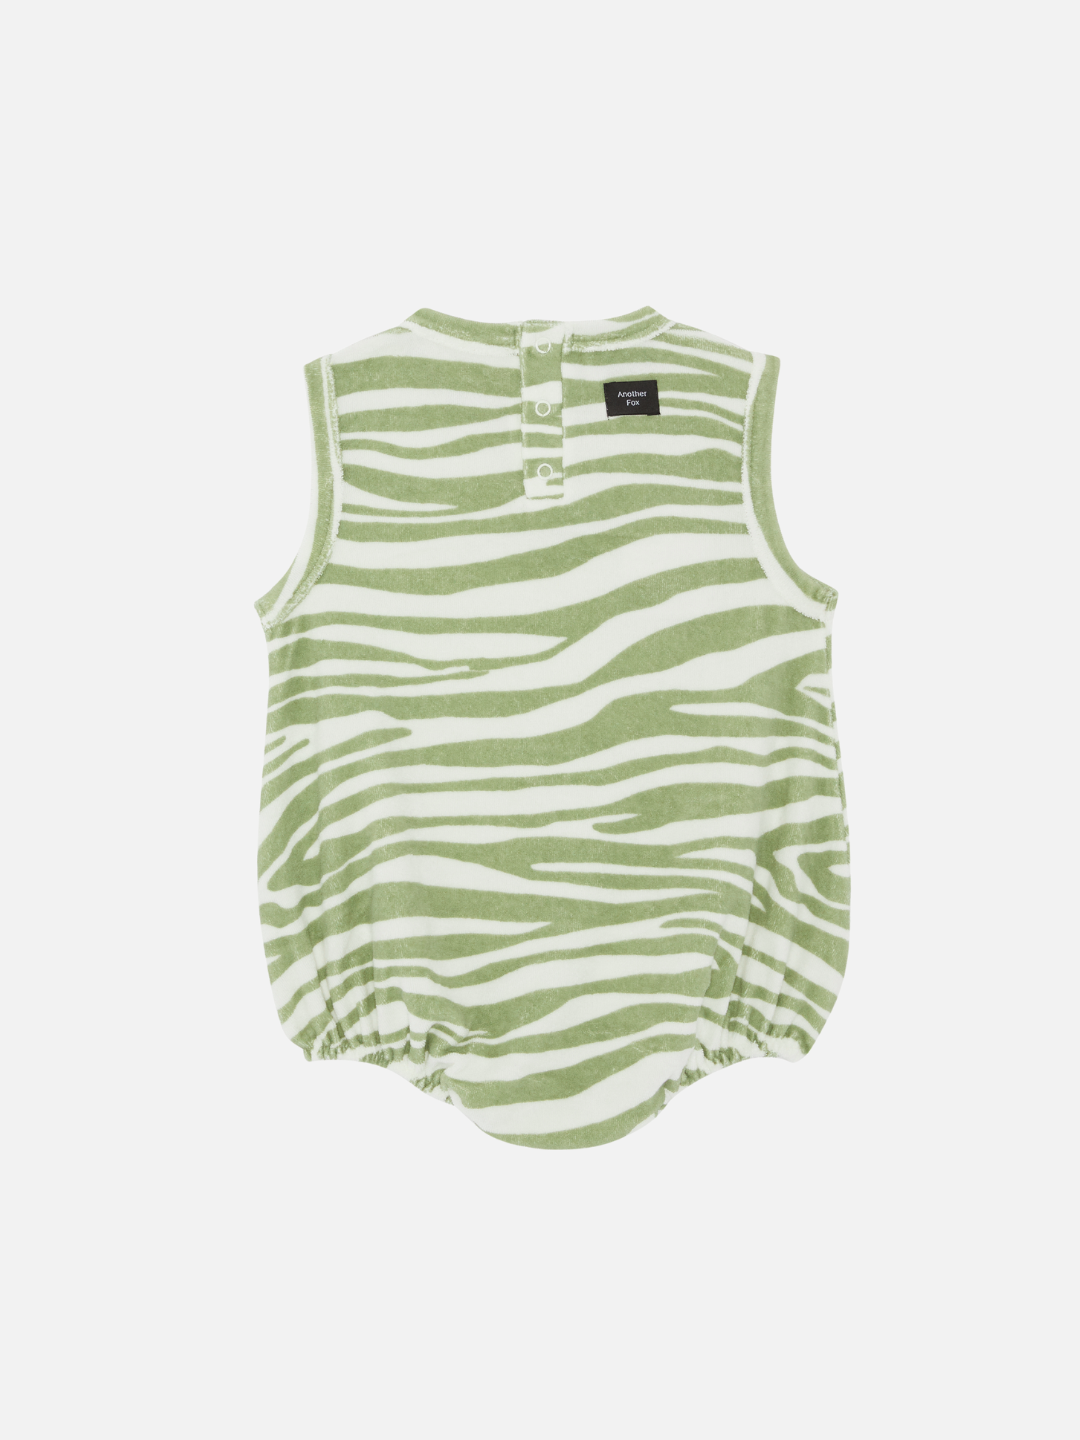 Back view of the baby Terry bubble bodysuit in green Tiger print